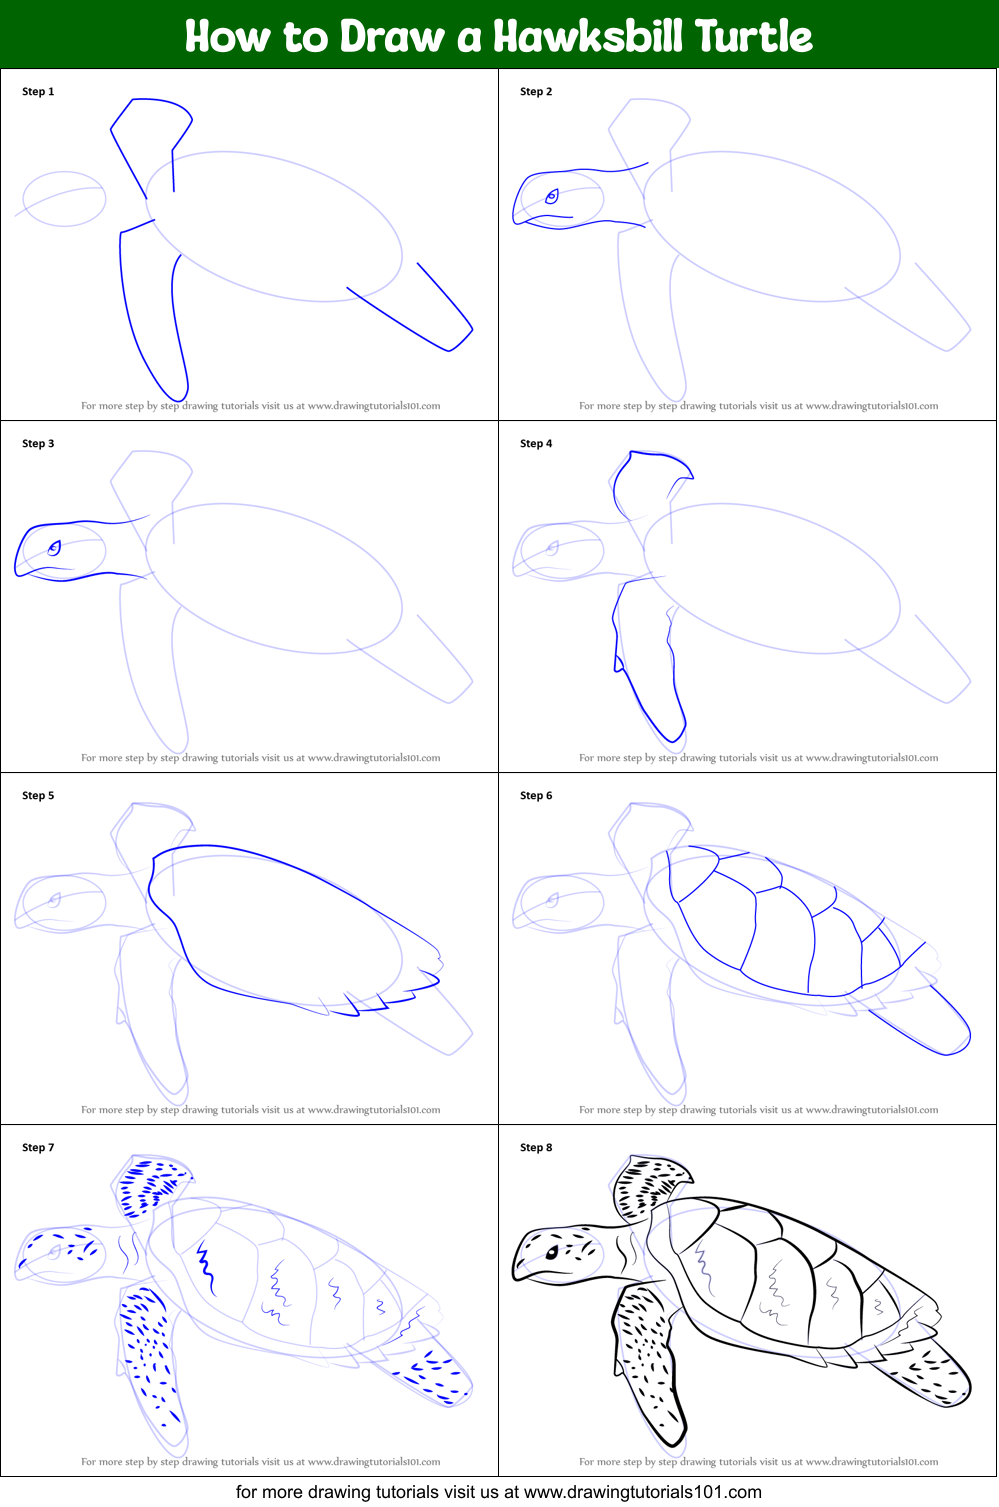 How to Draw a Hawksbill Turtle printable step by step